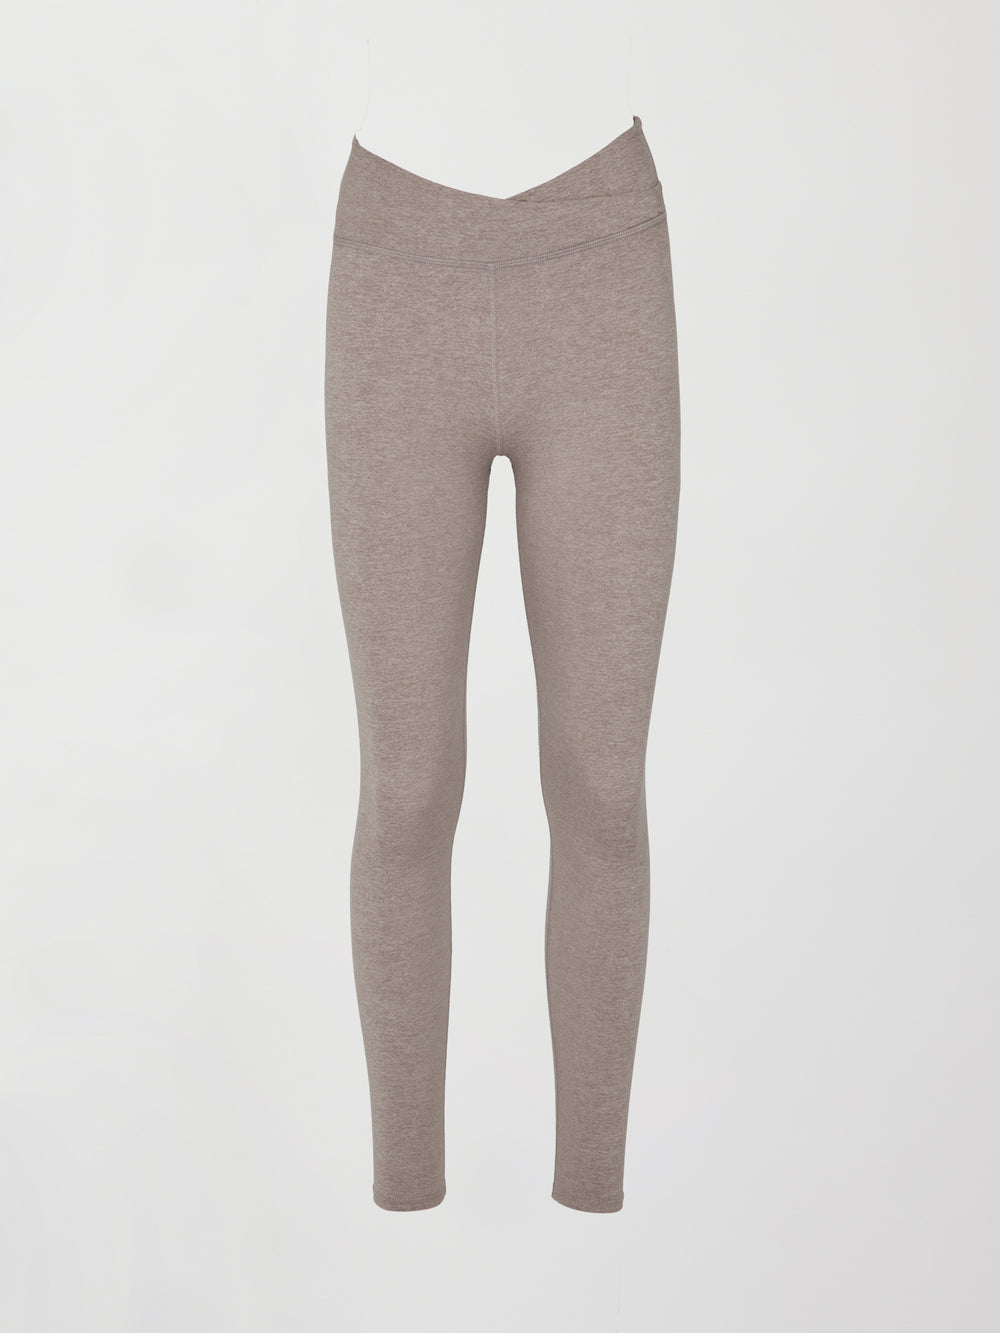 CABLE KNIT LEGGINGS in Oatmeal Heather